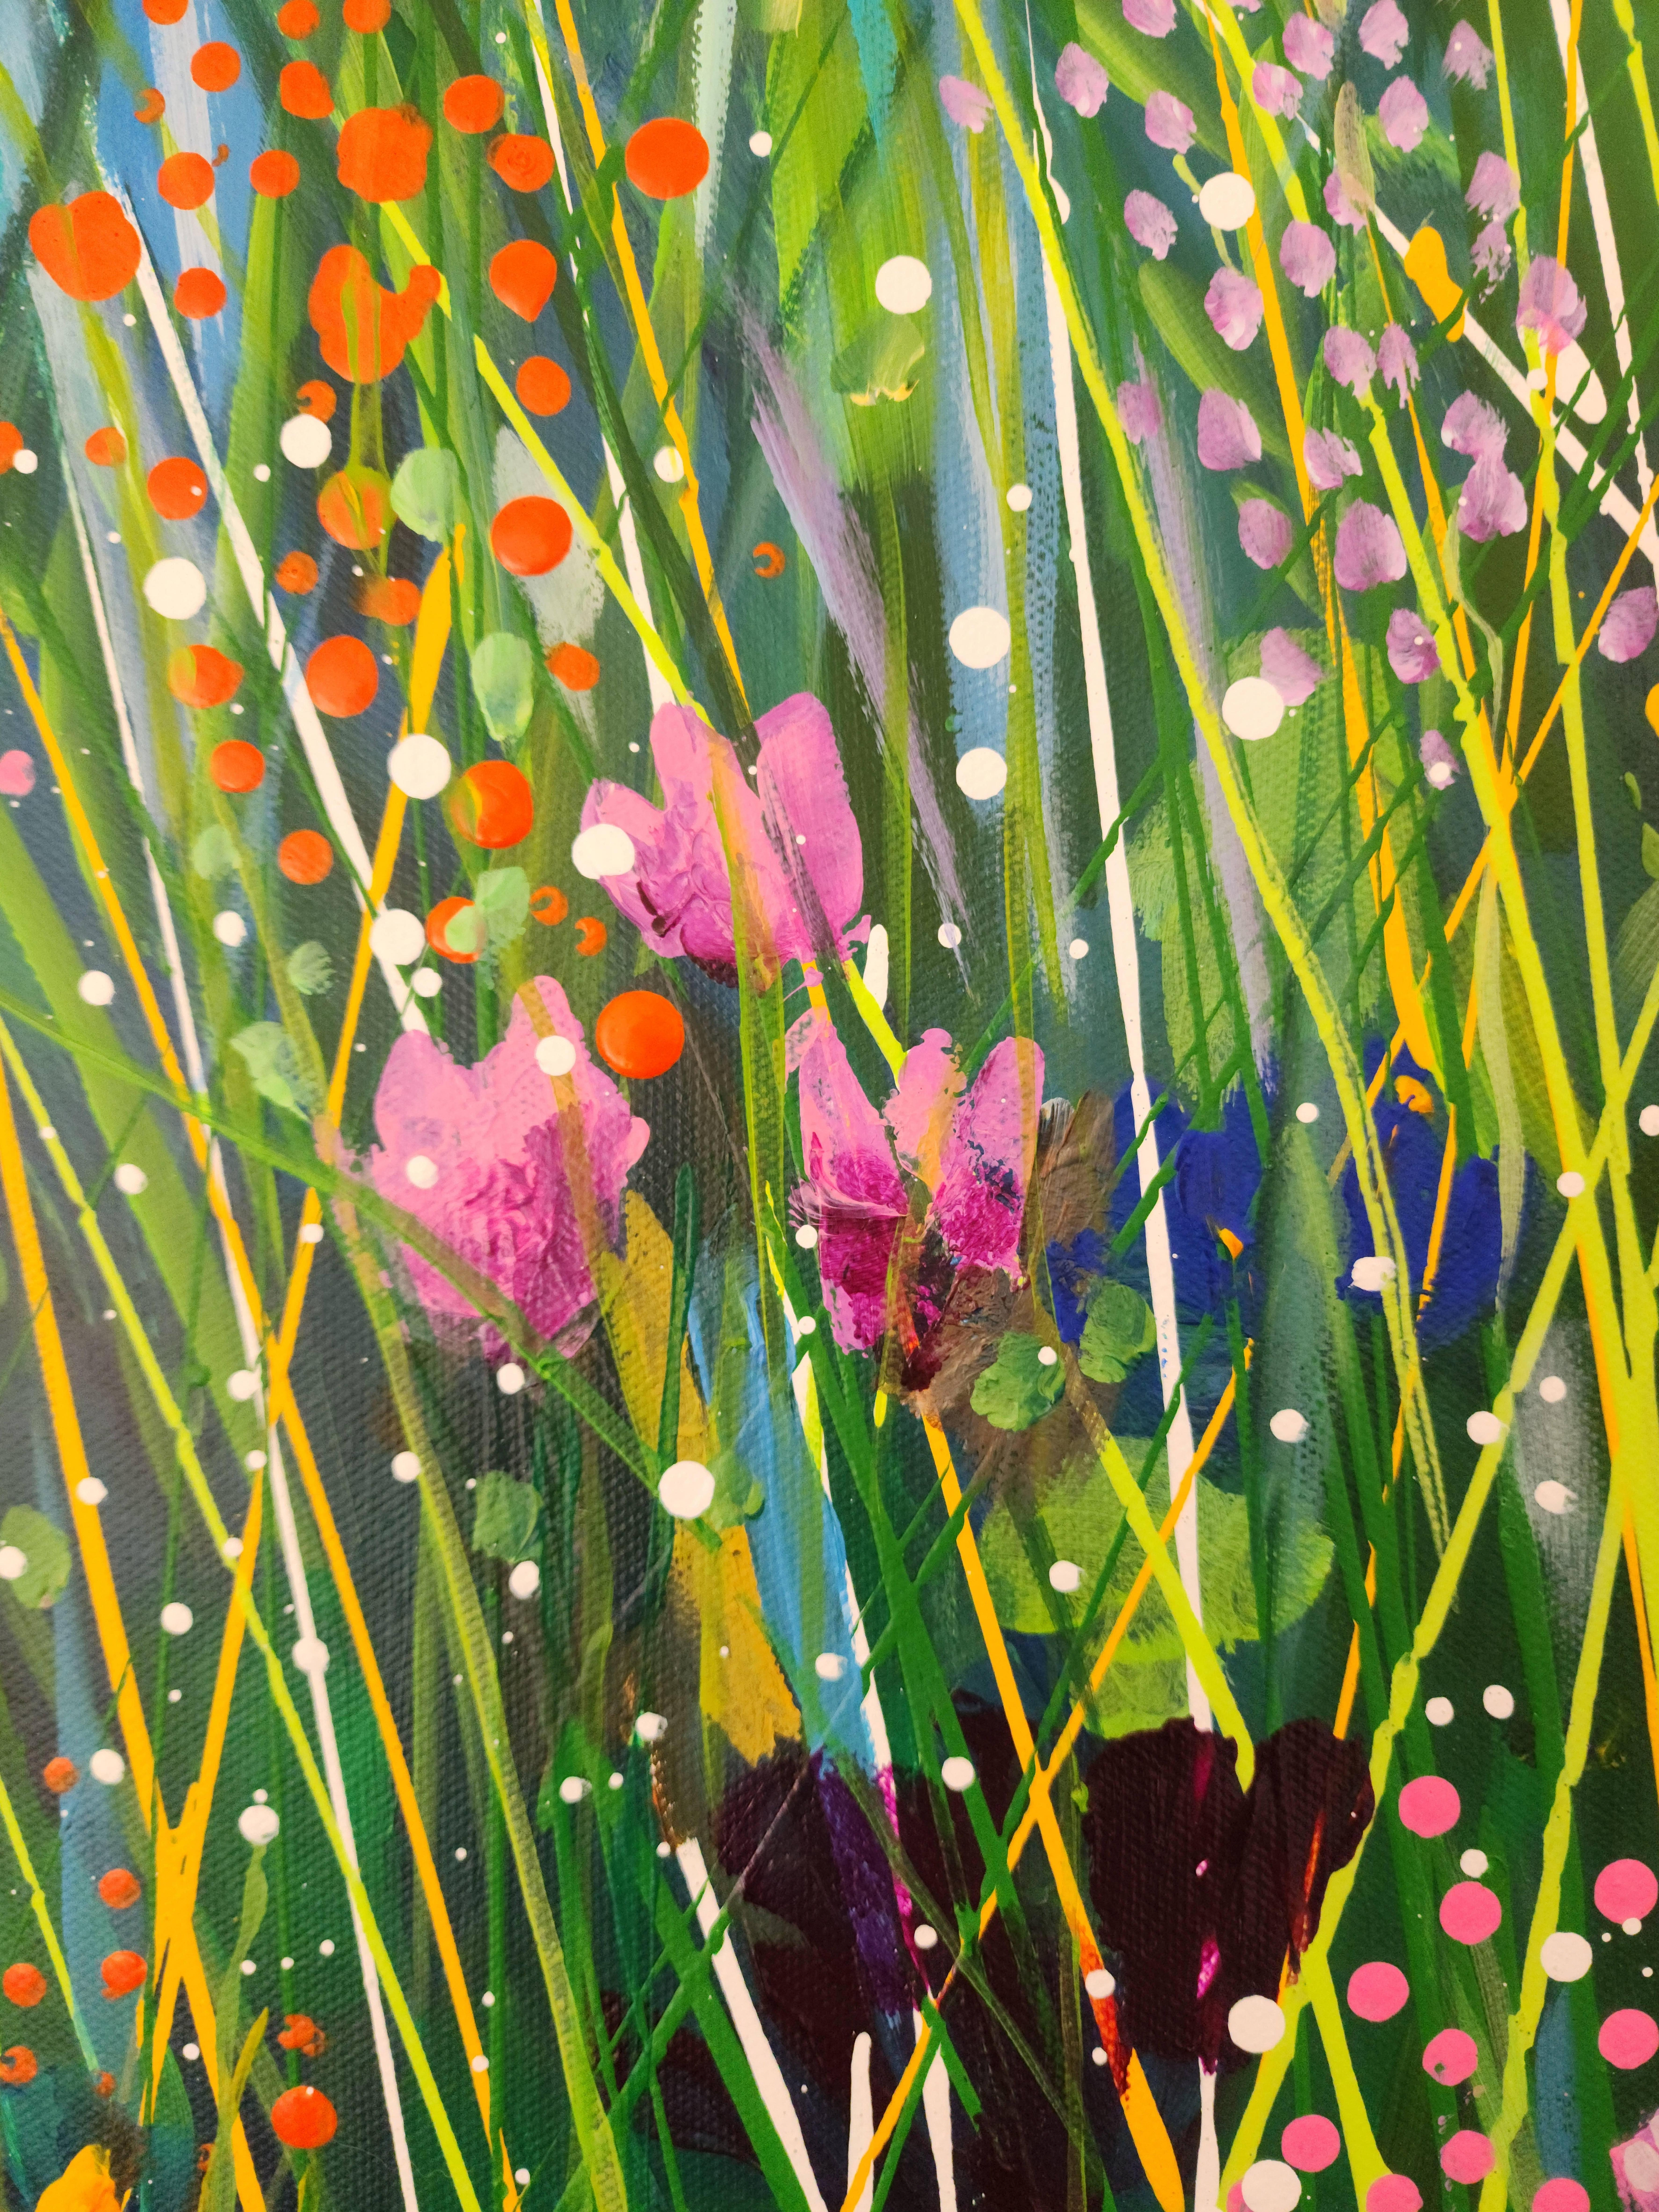 In flower fields of Dreams - Nature Meadow Stillness Beauty Contemporary Color 8